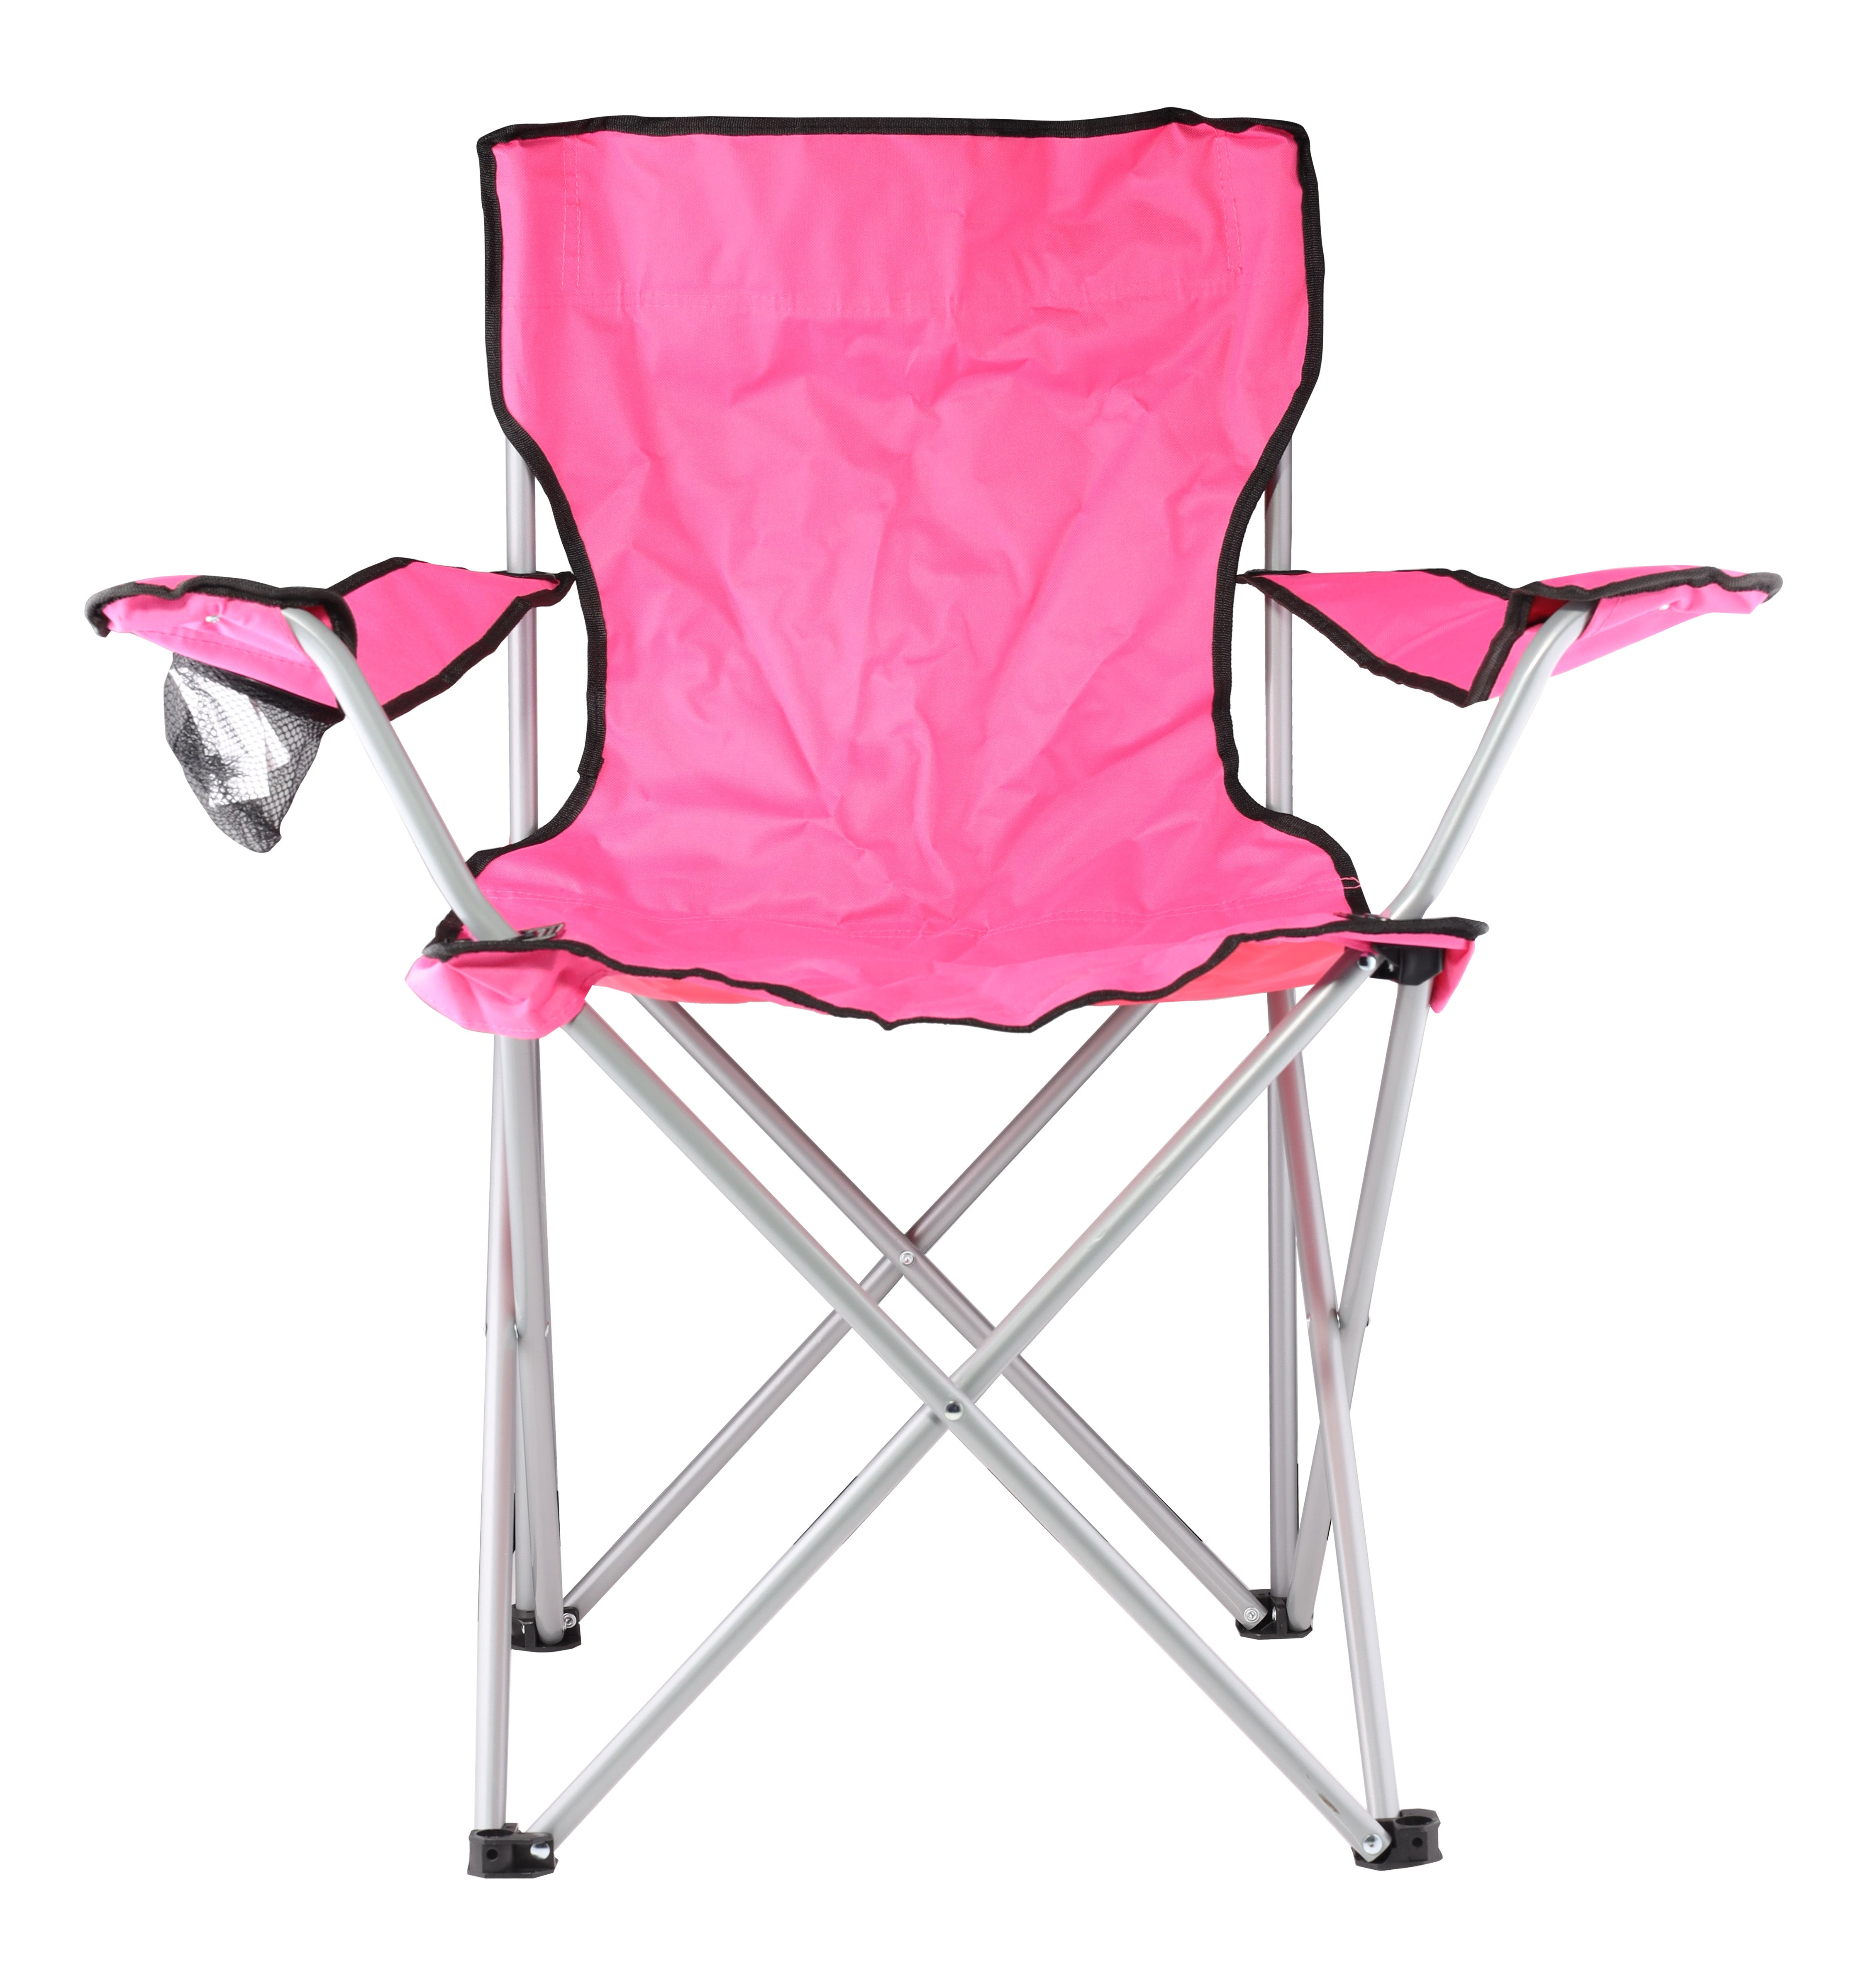 Outdoor Folding Chair with Cup Holder